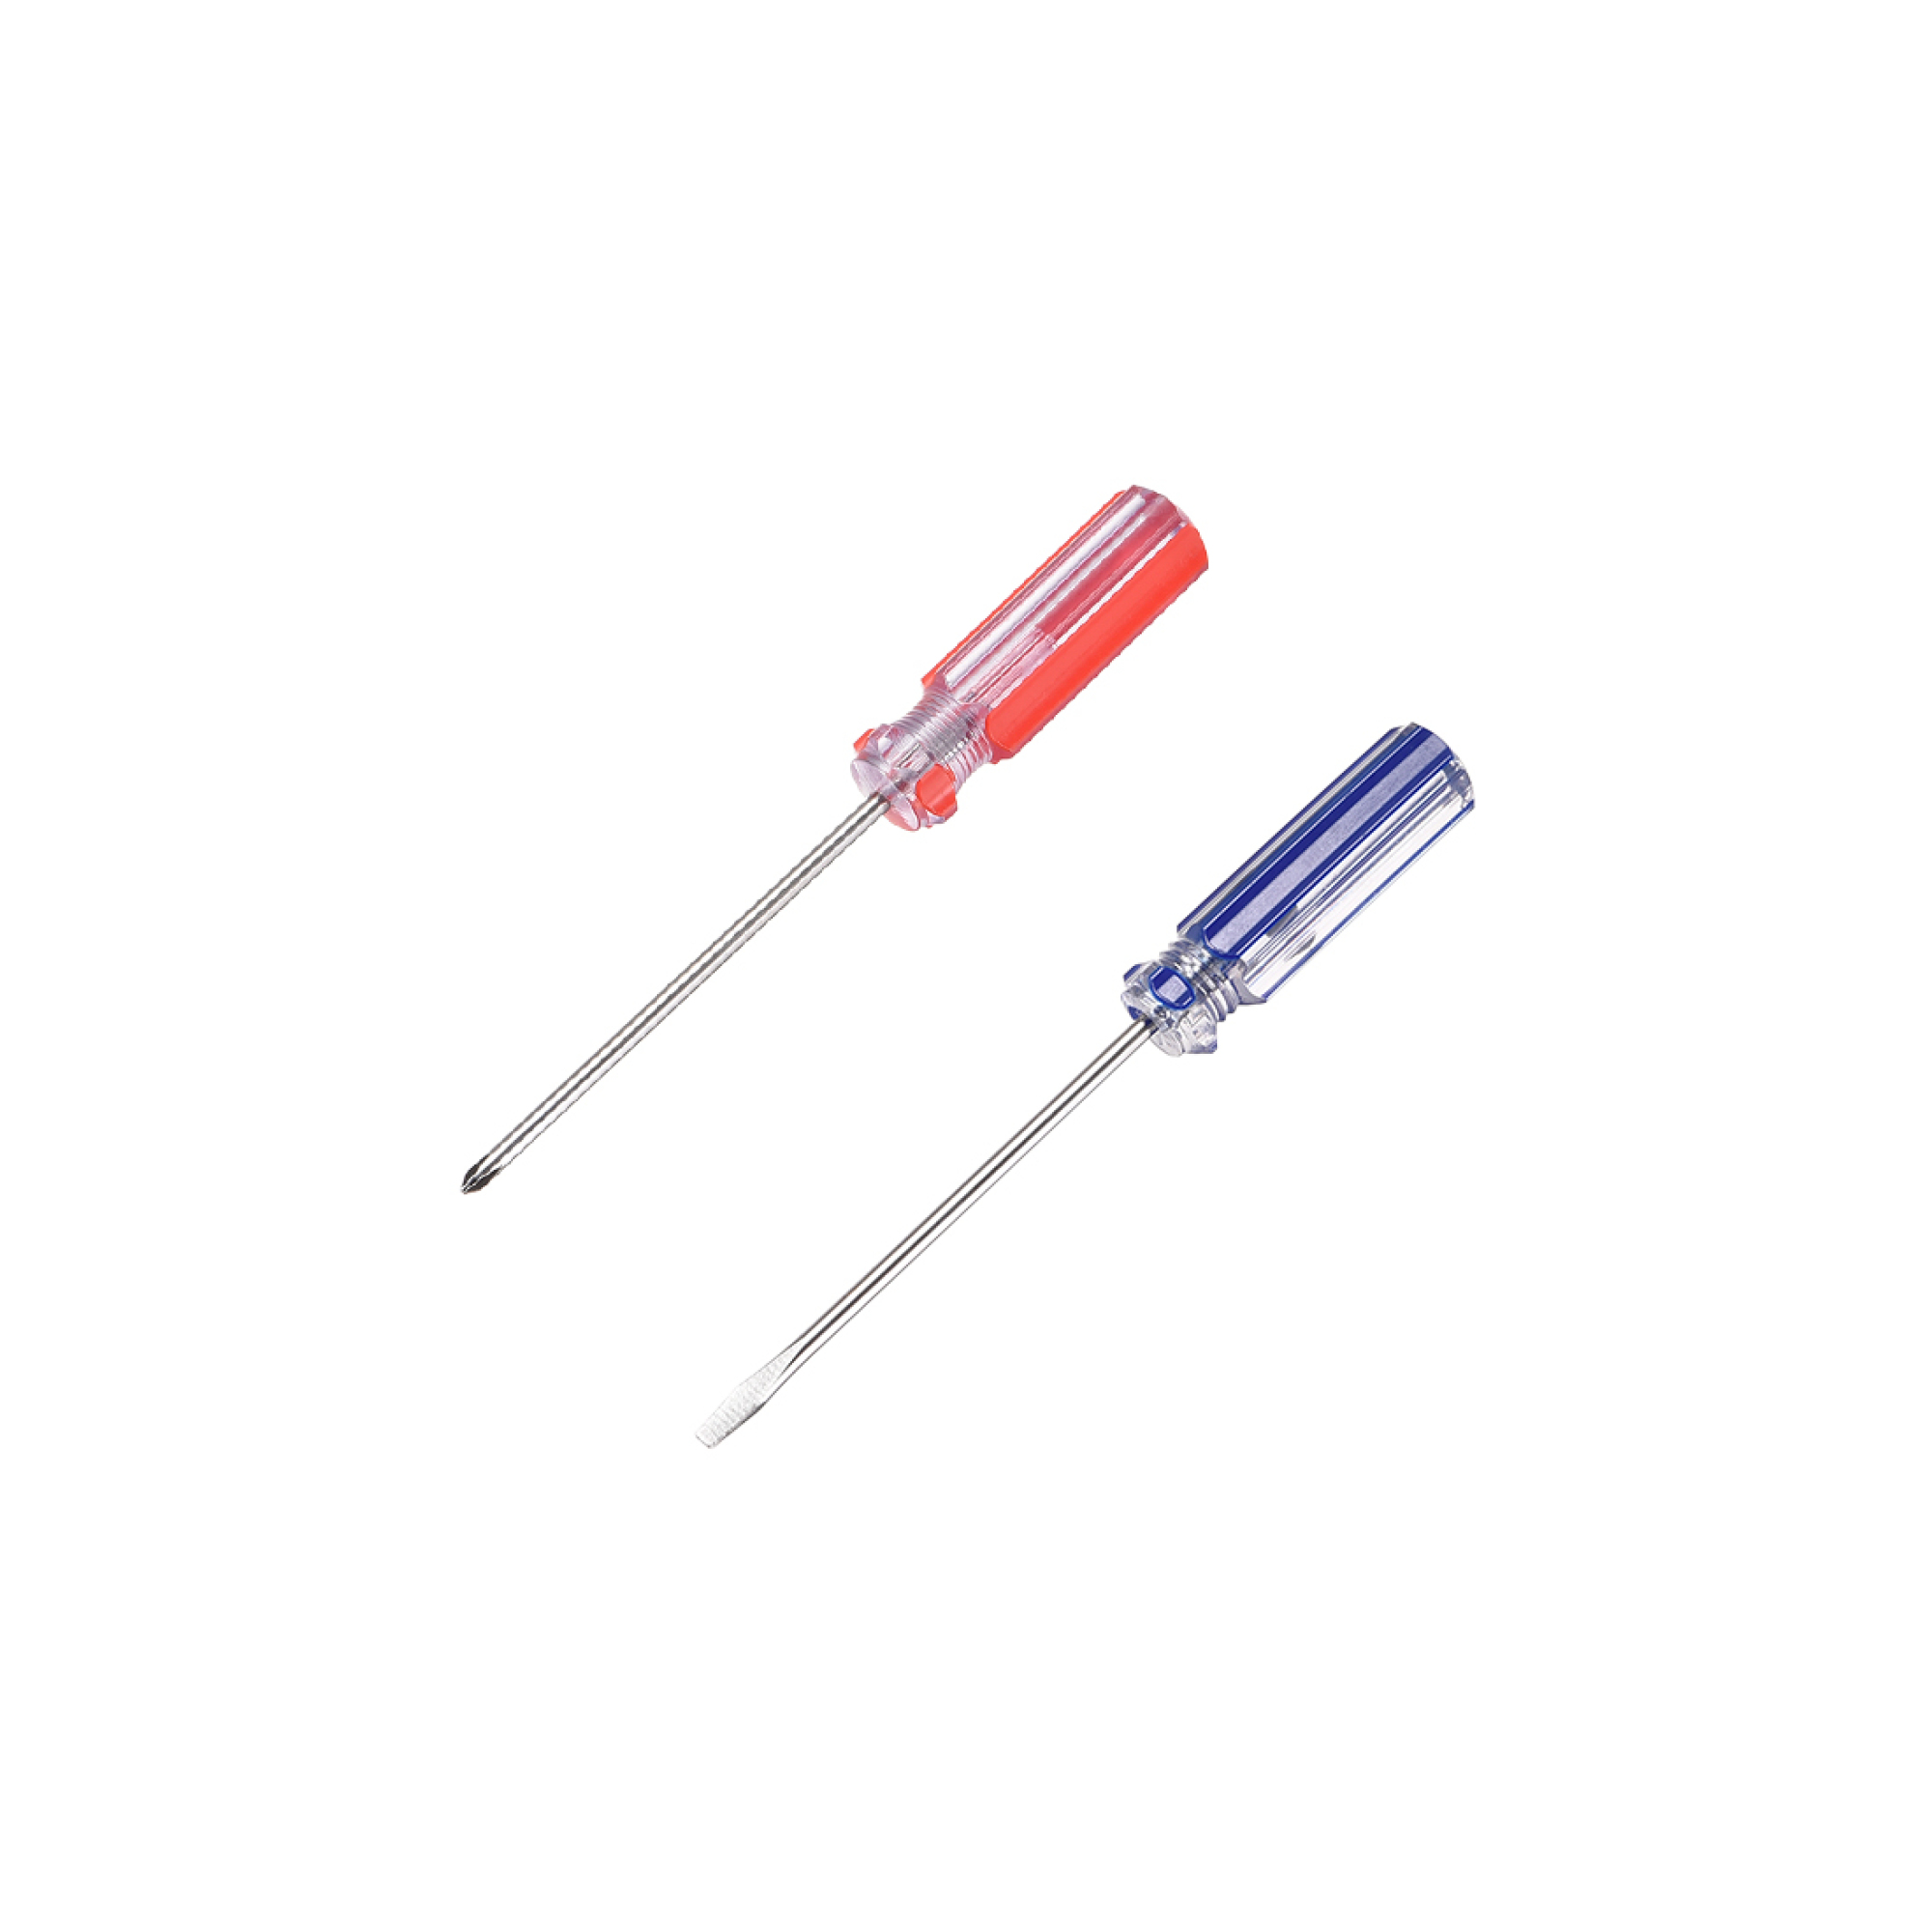 PH00 Phillips / 3mm Slotted Magnetic Screwdriver Set of 2pcs